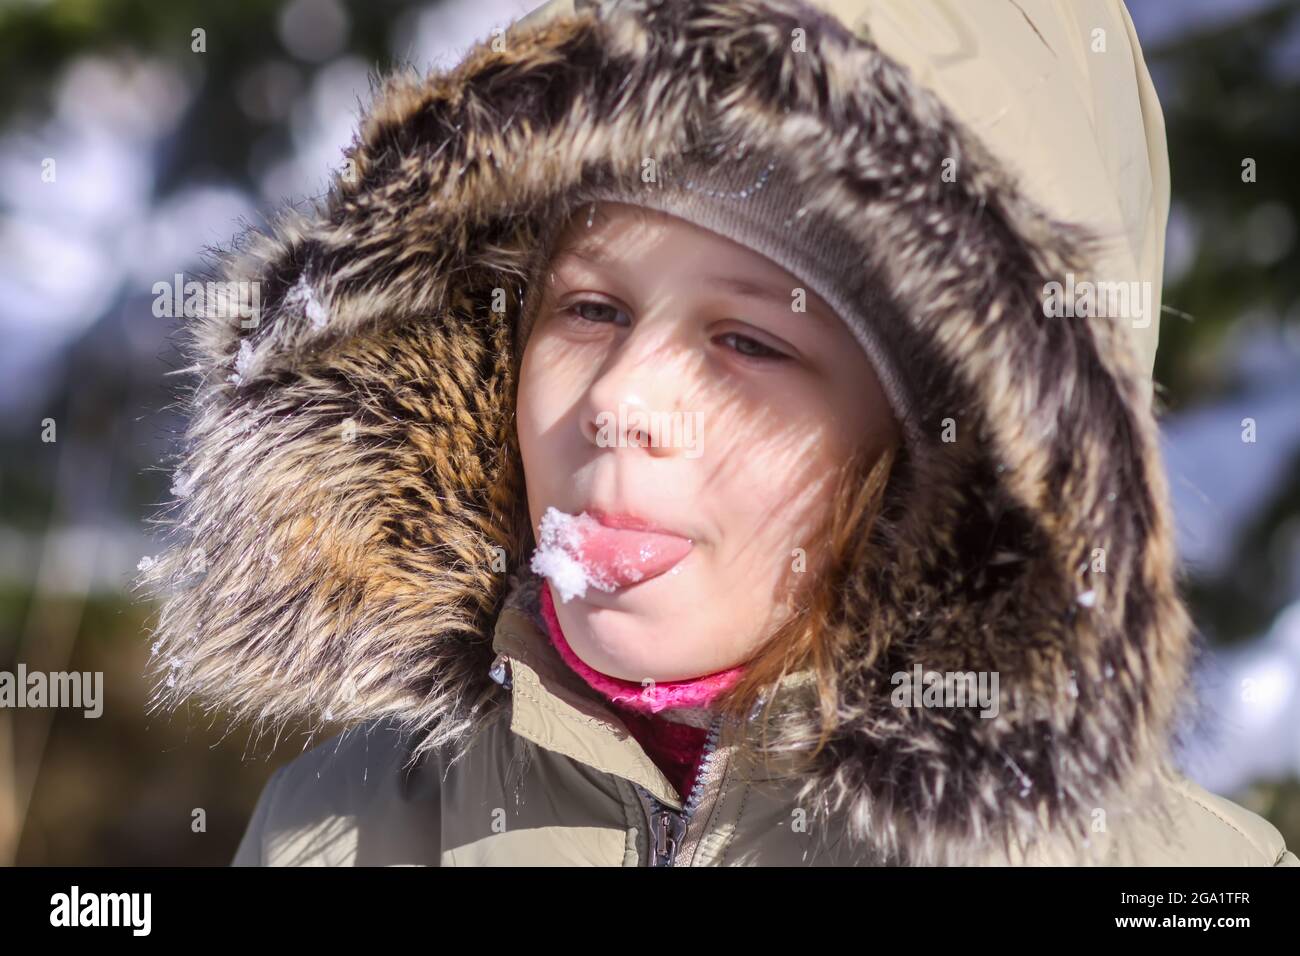 A little girl catching snowflakes on the tongue. Happy child walking outdoors in cold sunny day and enjoying winter. Stock Photo